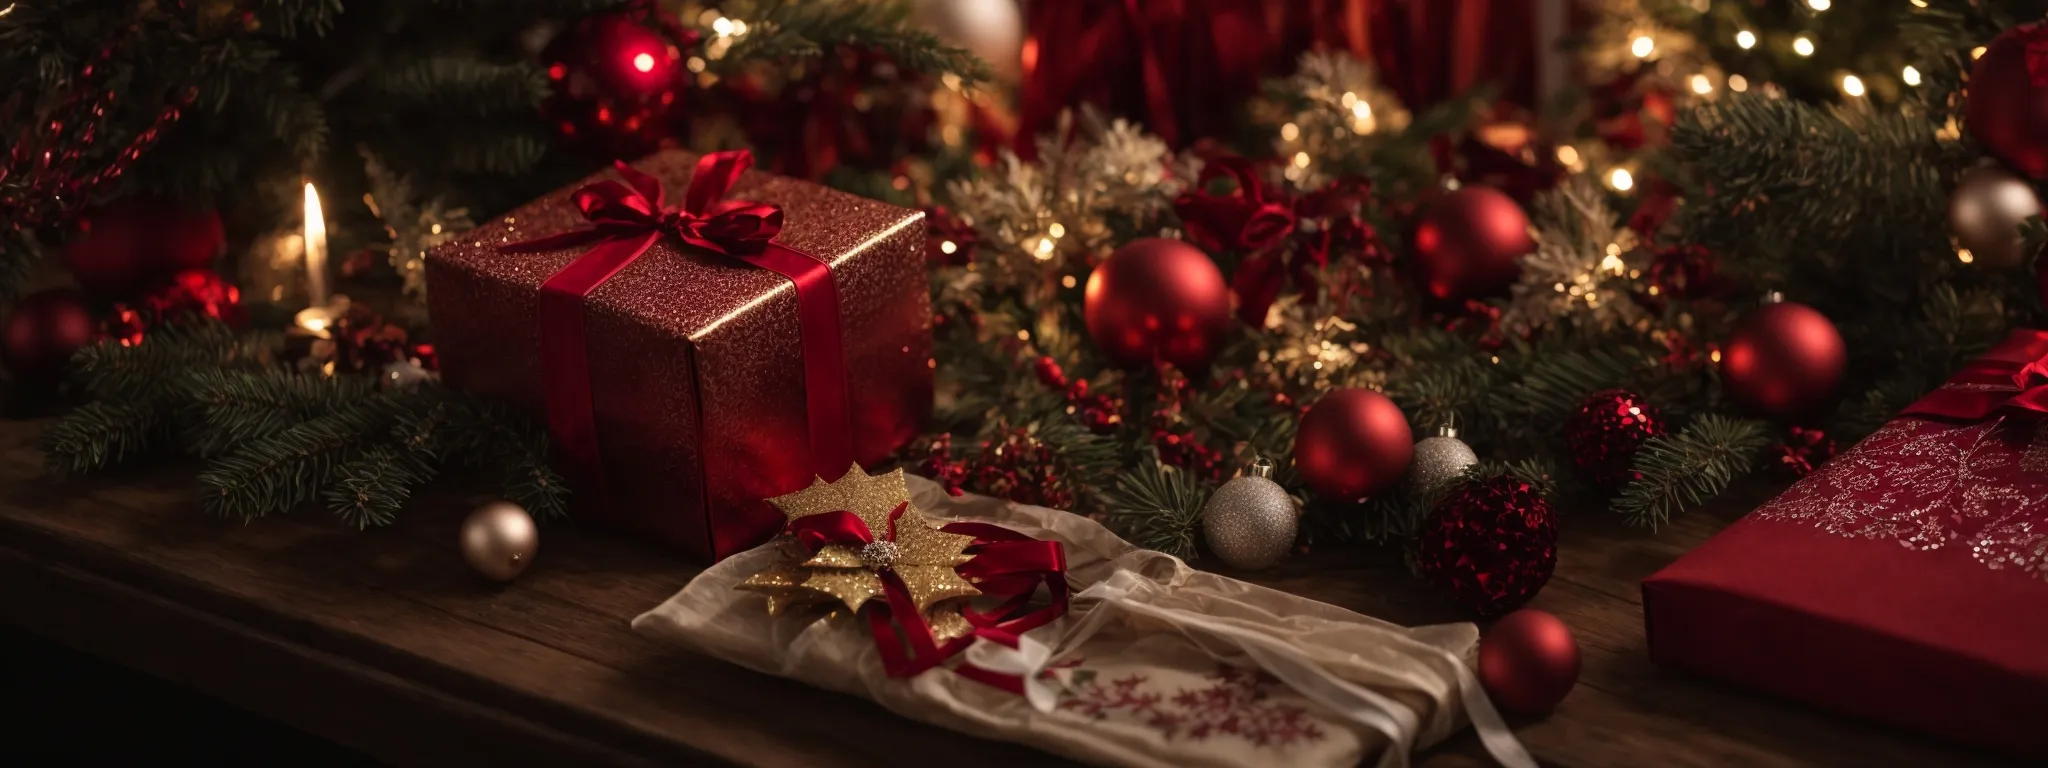 a festive online shopping page displaying holiday decorations and gift suggestions.